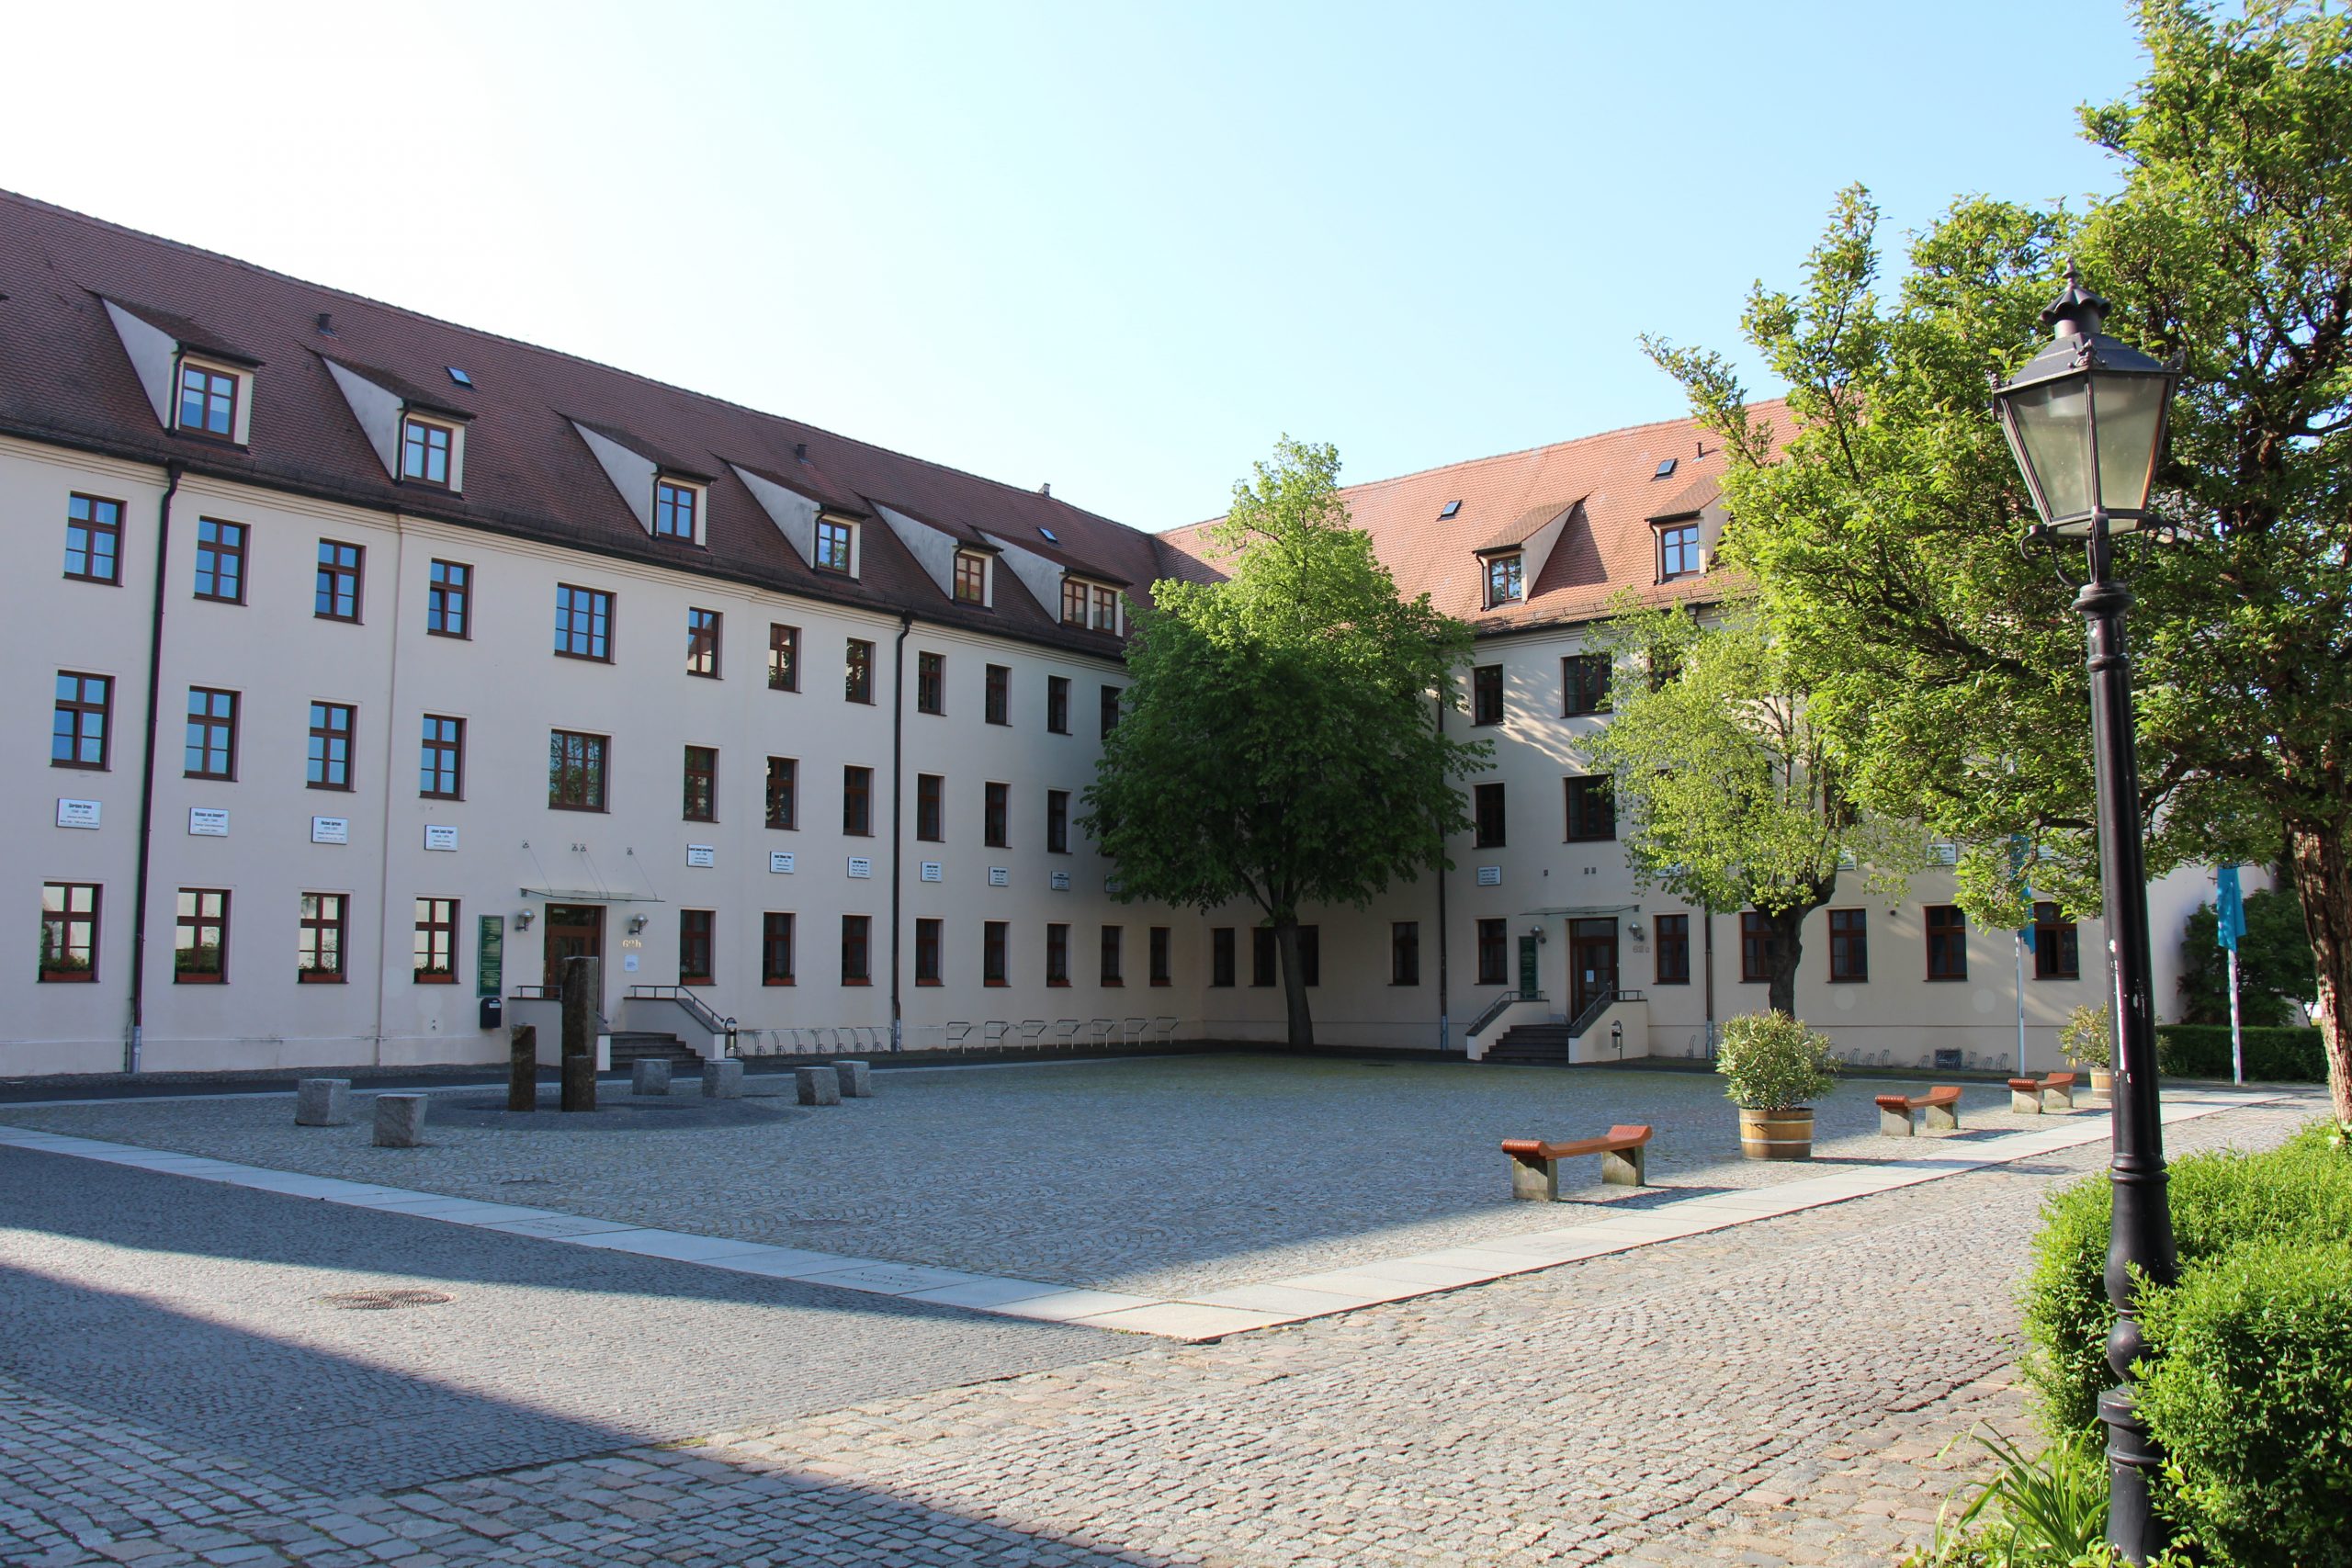 The second Wittenberg Summer Course starts